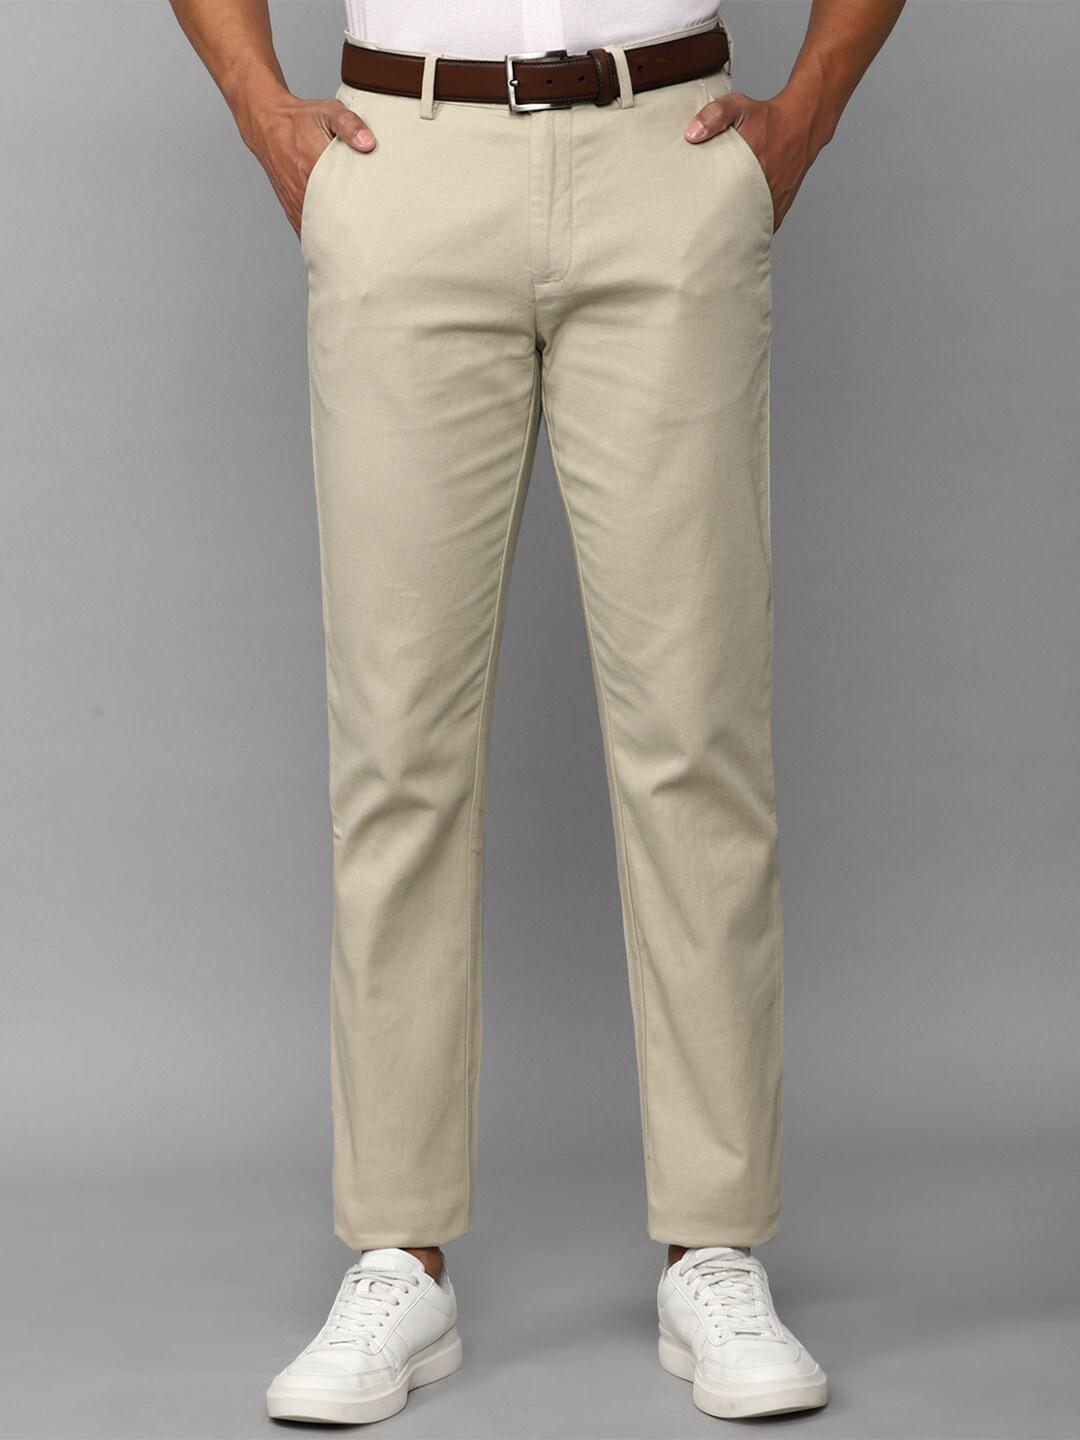 Allen Solly Self Design Textured Trousers